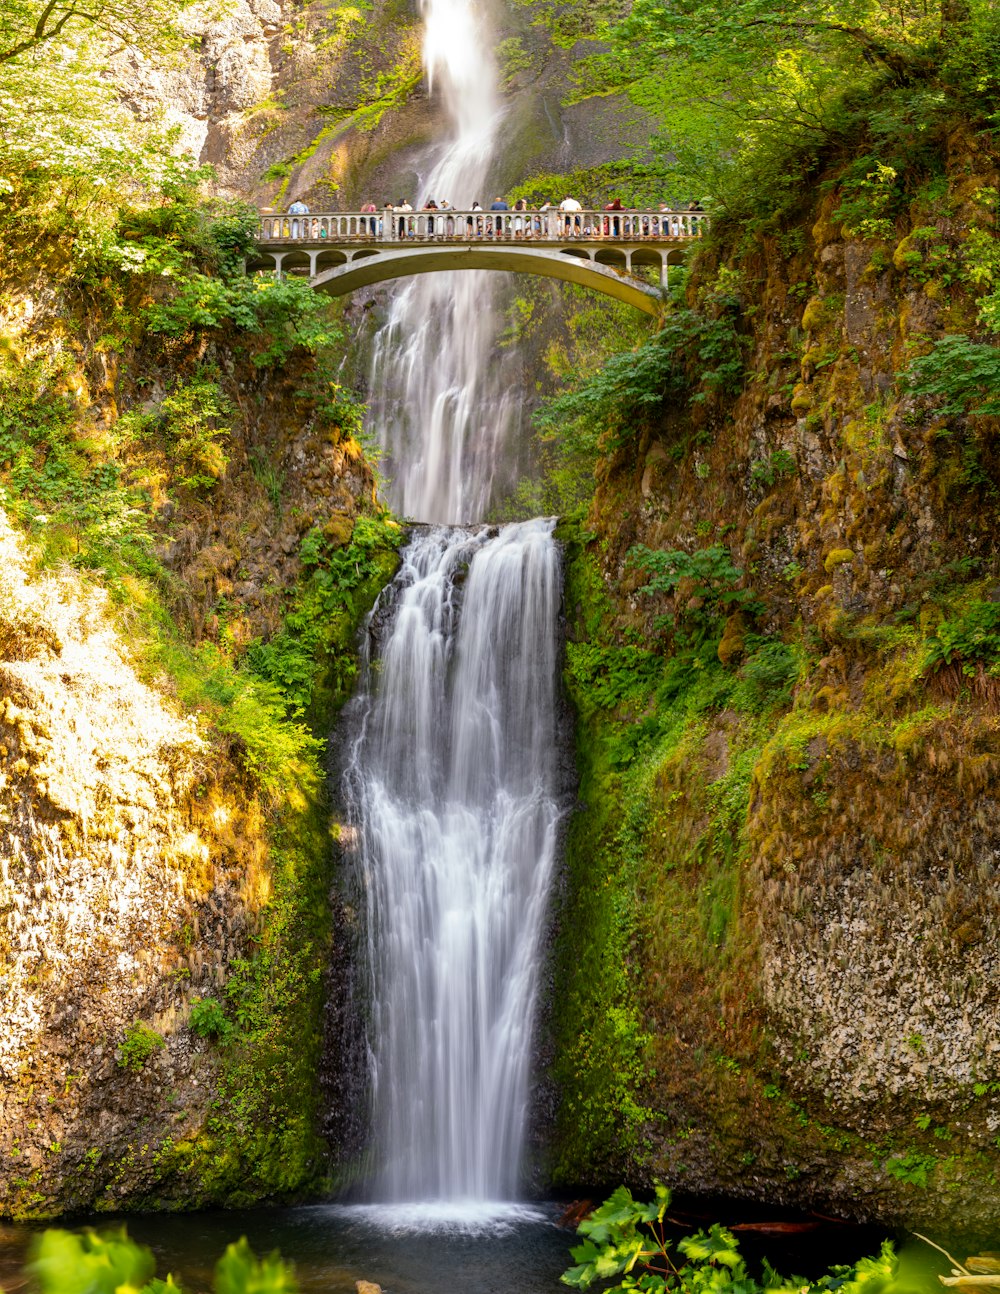 a waterfall with a bridge over it and people standing on it